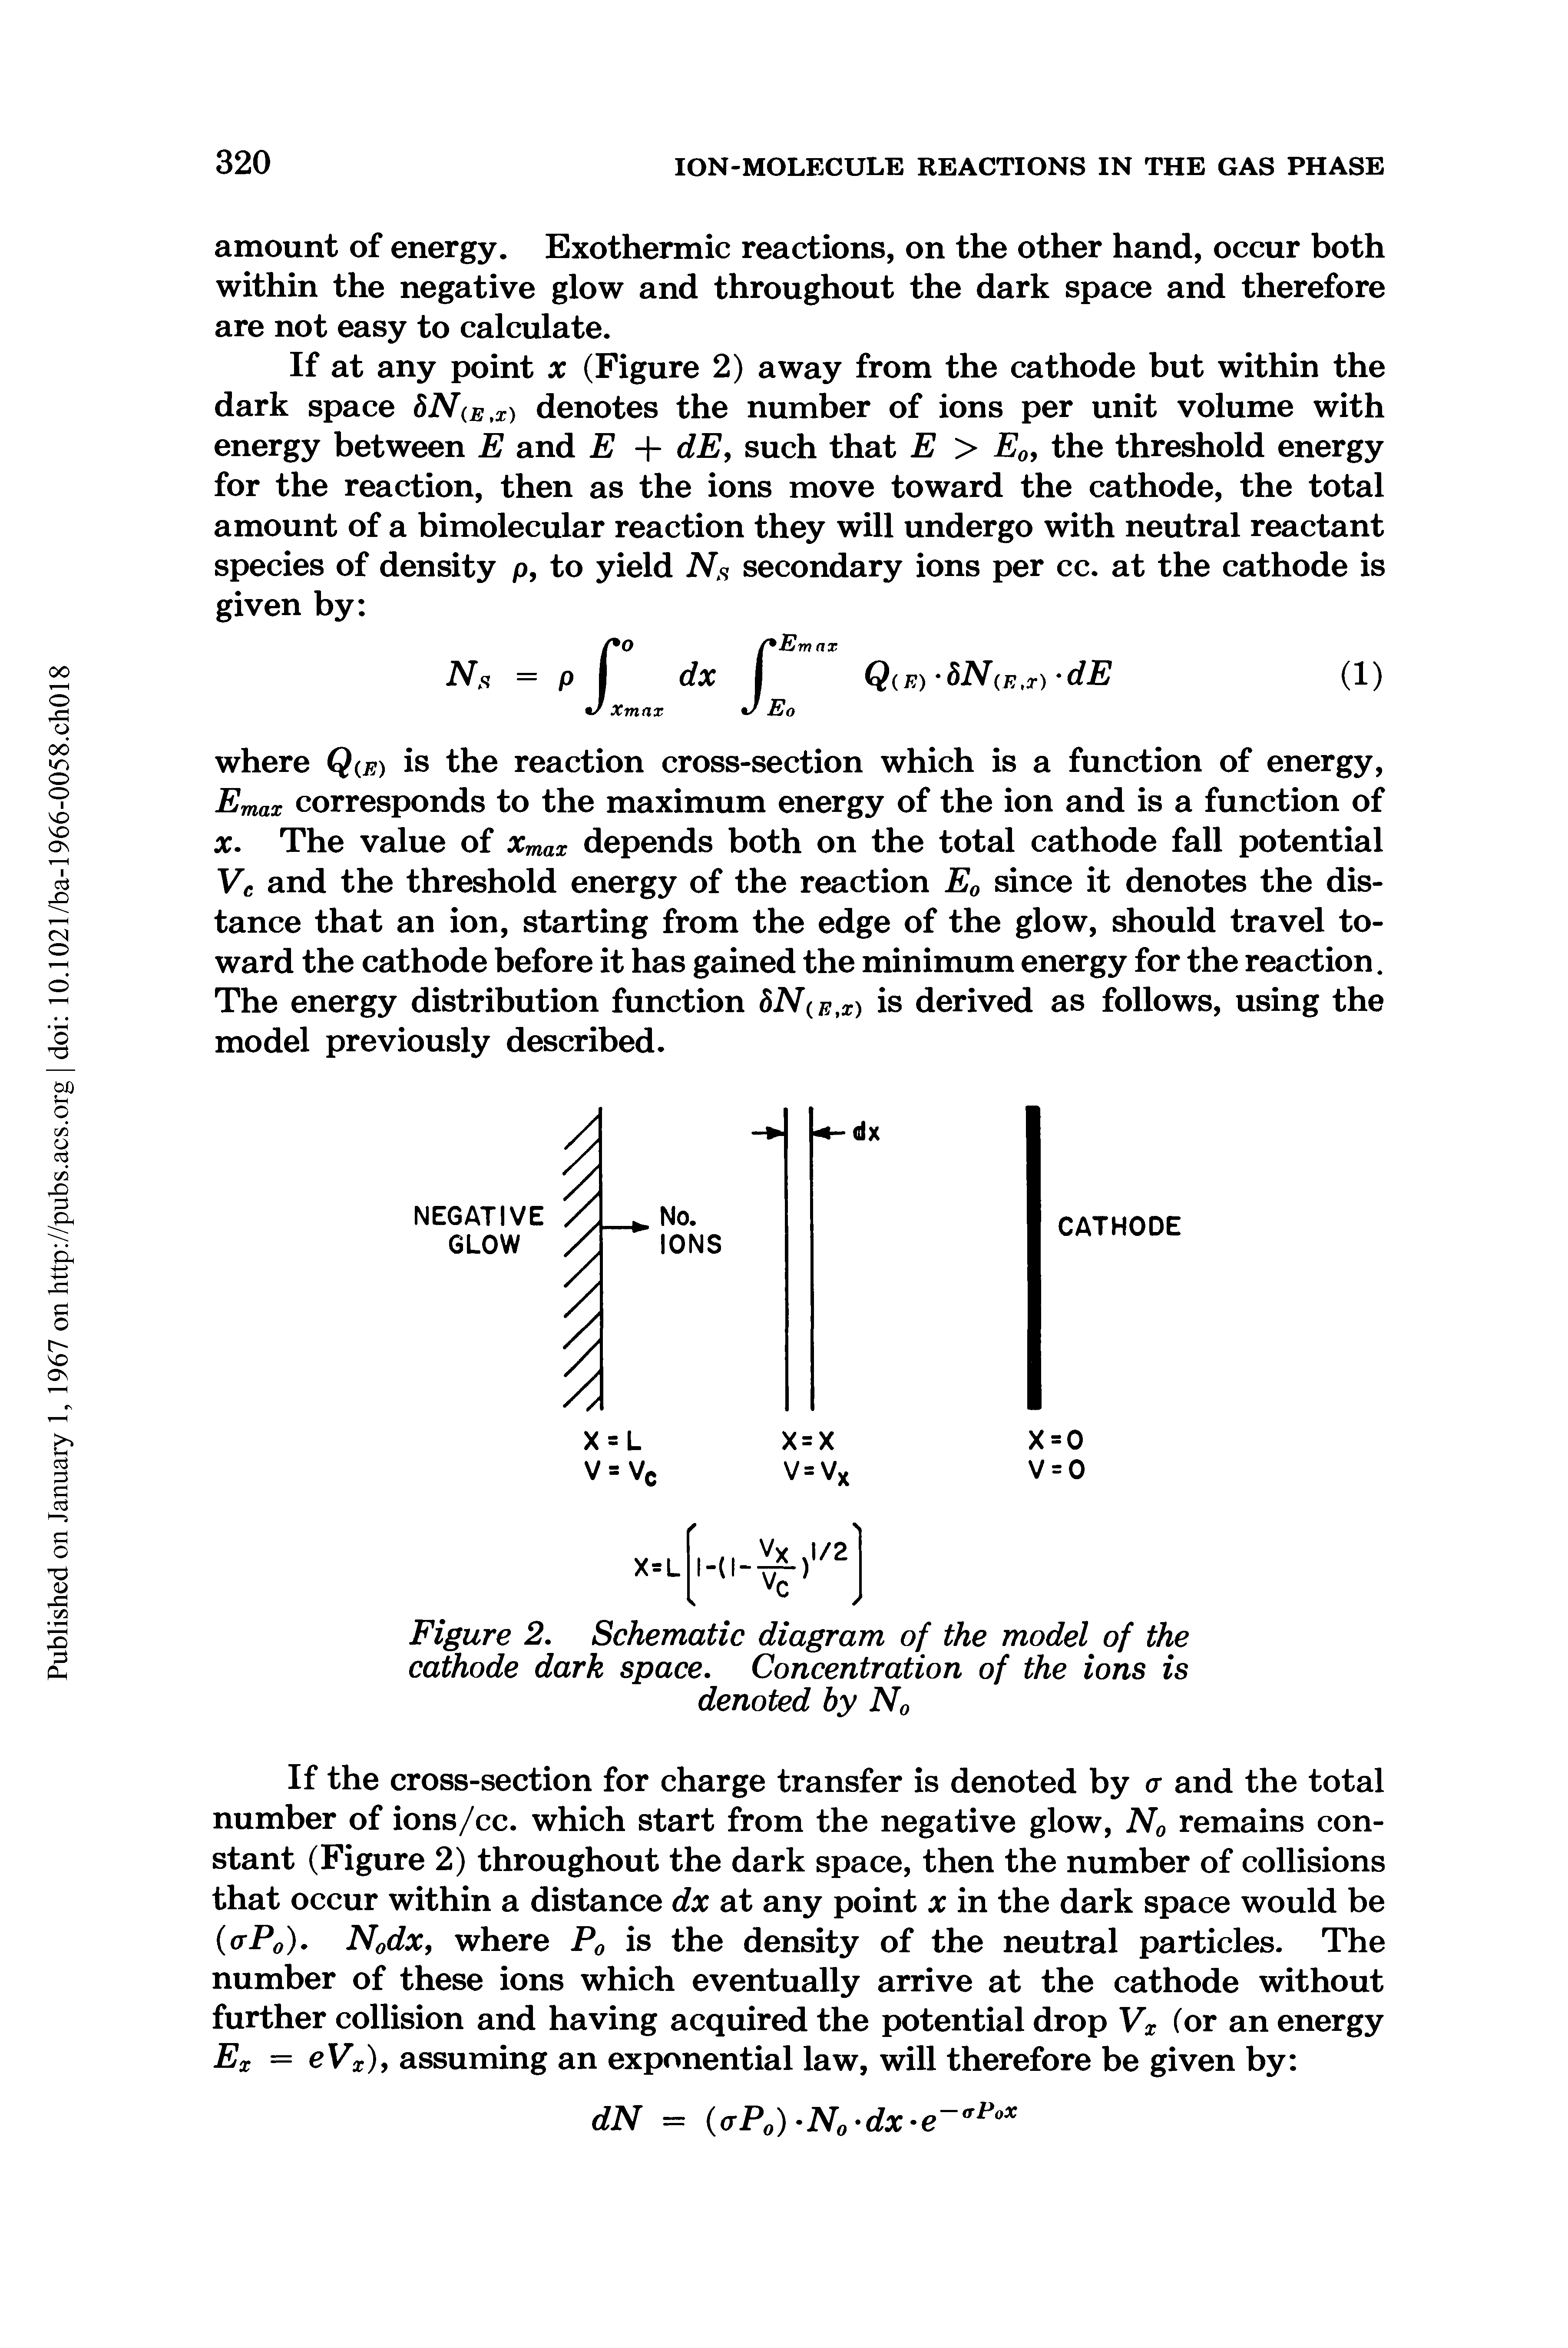 Figure 2. Schematic diagram of the model of the cathode dark space. Concentration of the ions is denoted by N0...